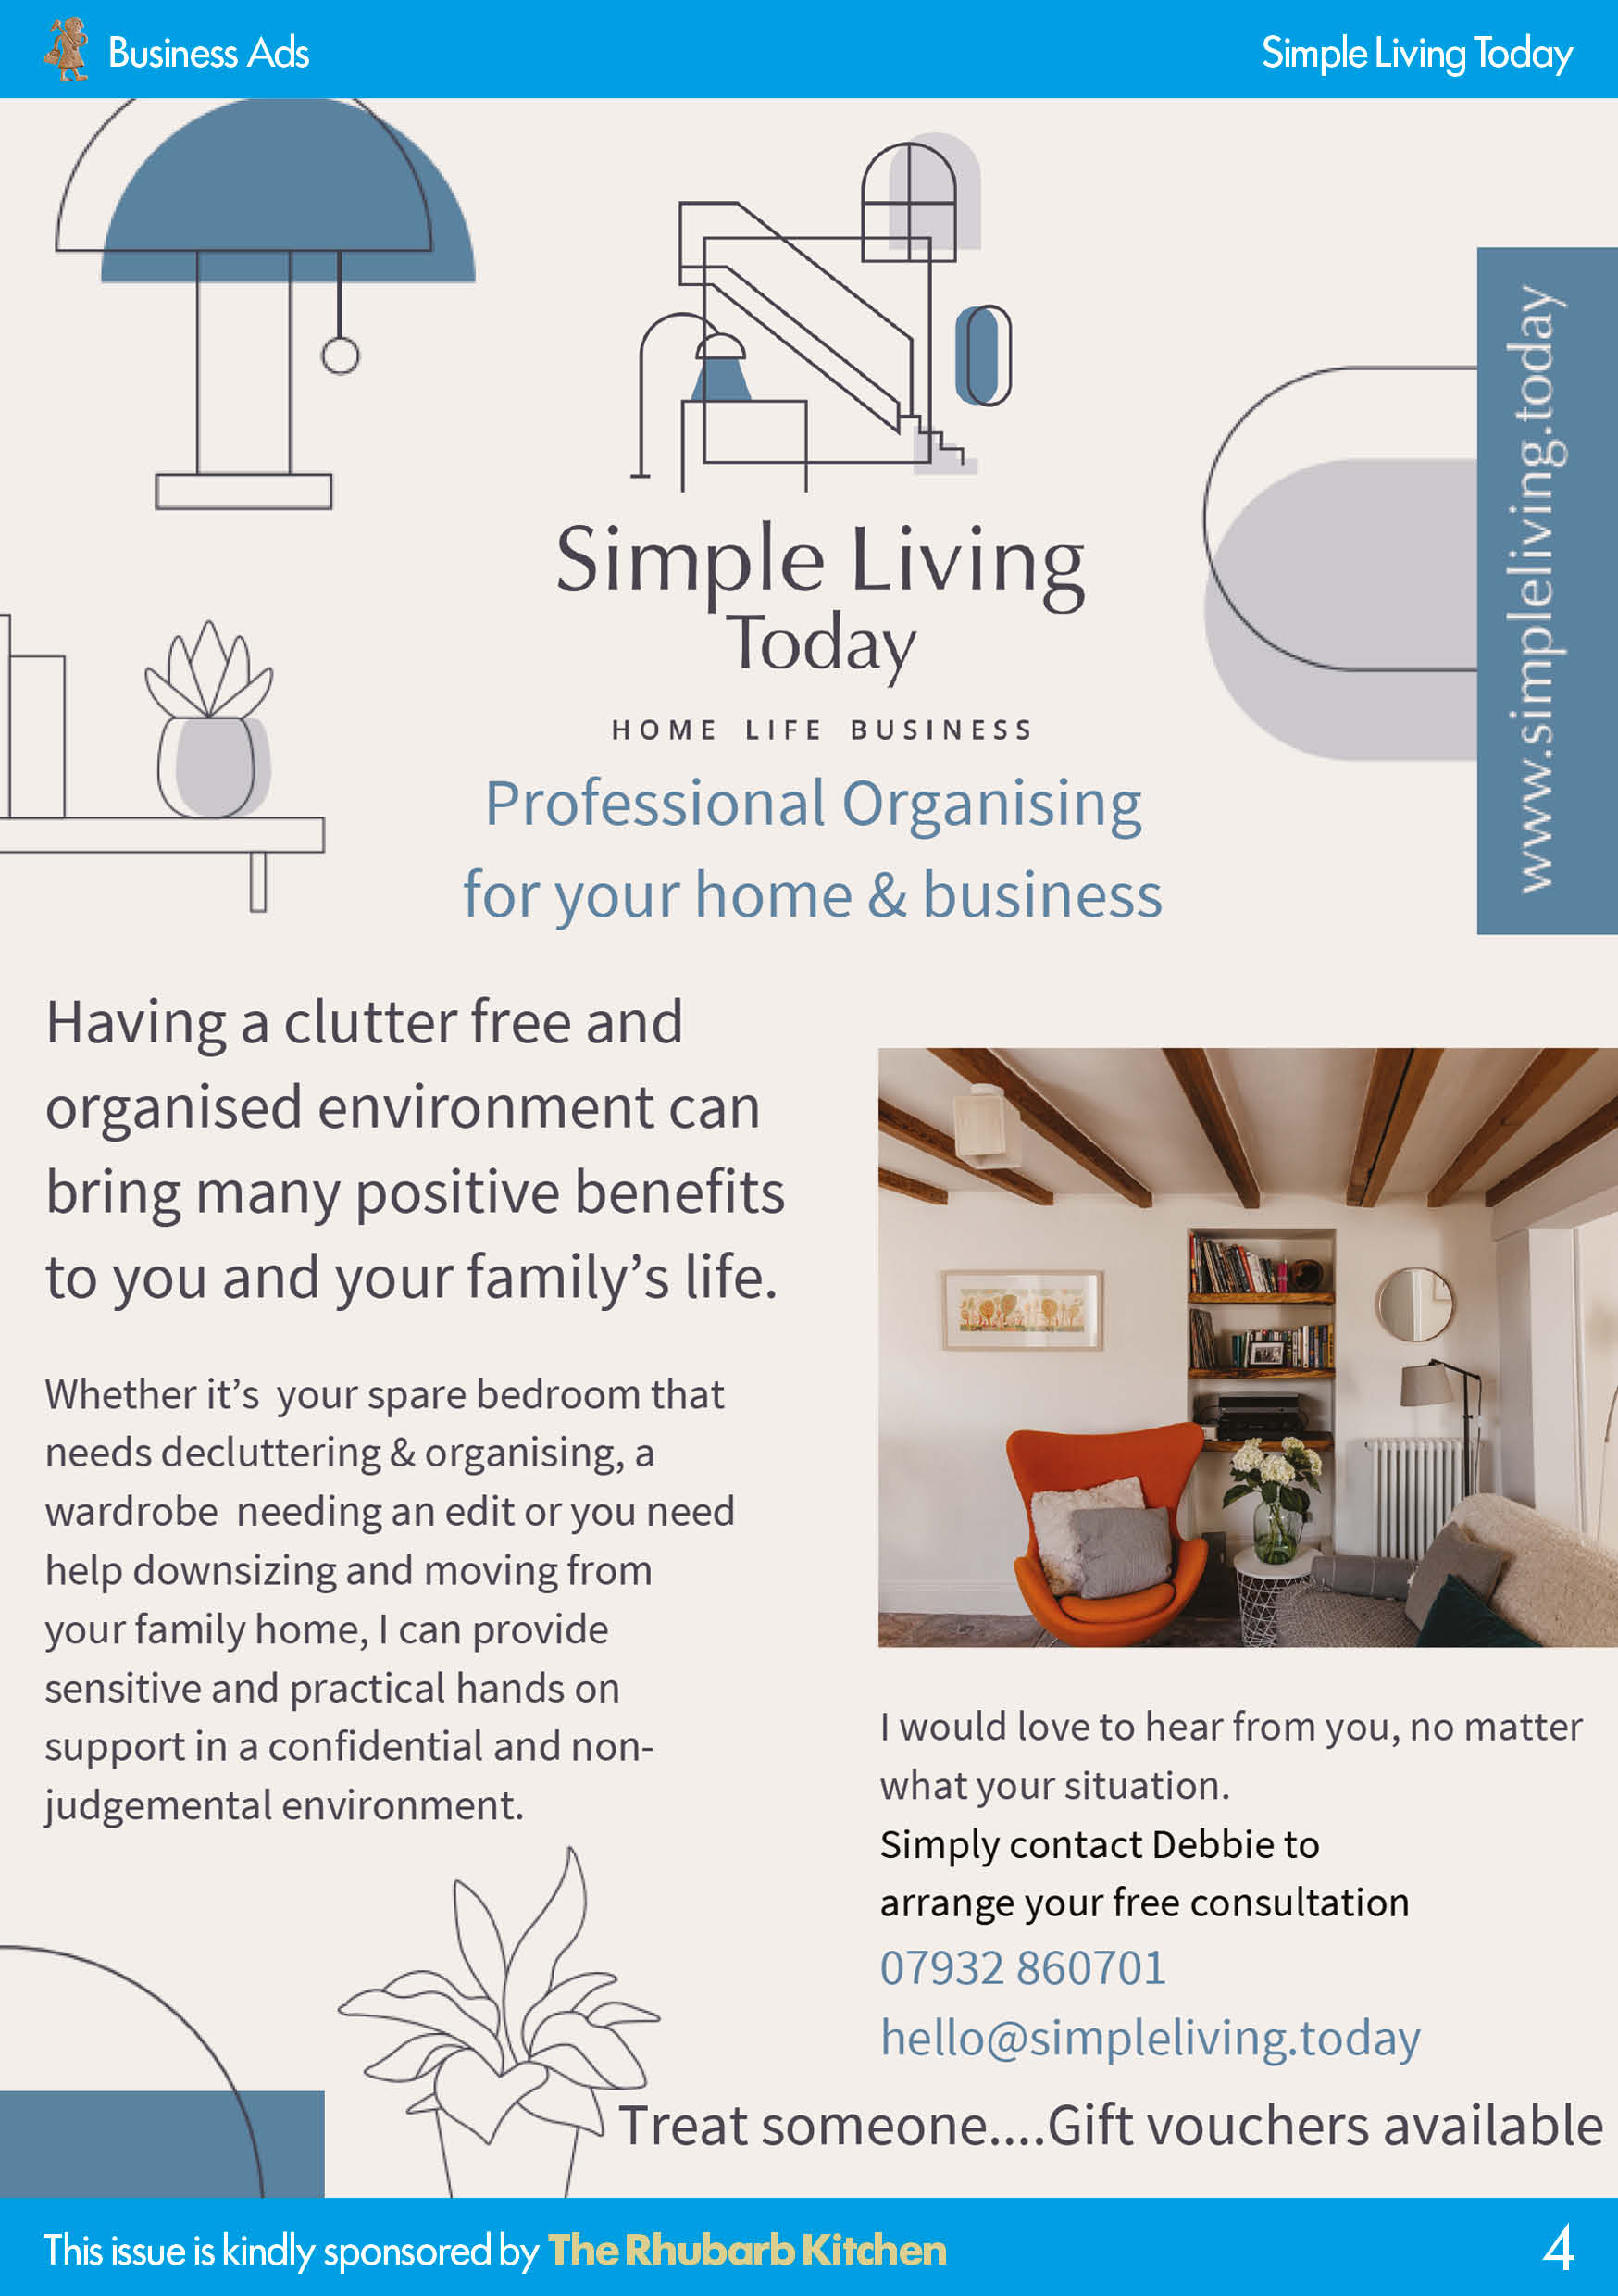 Simple Living Today